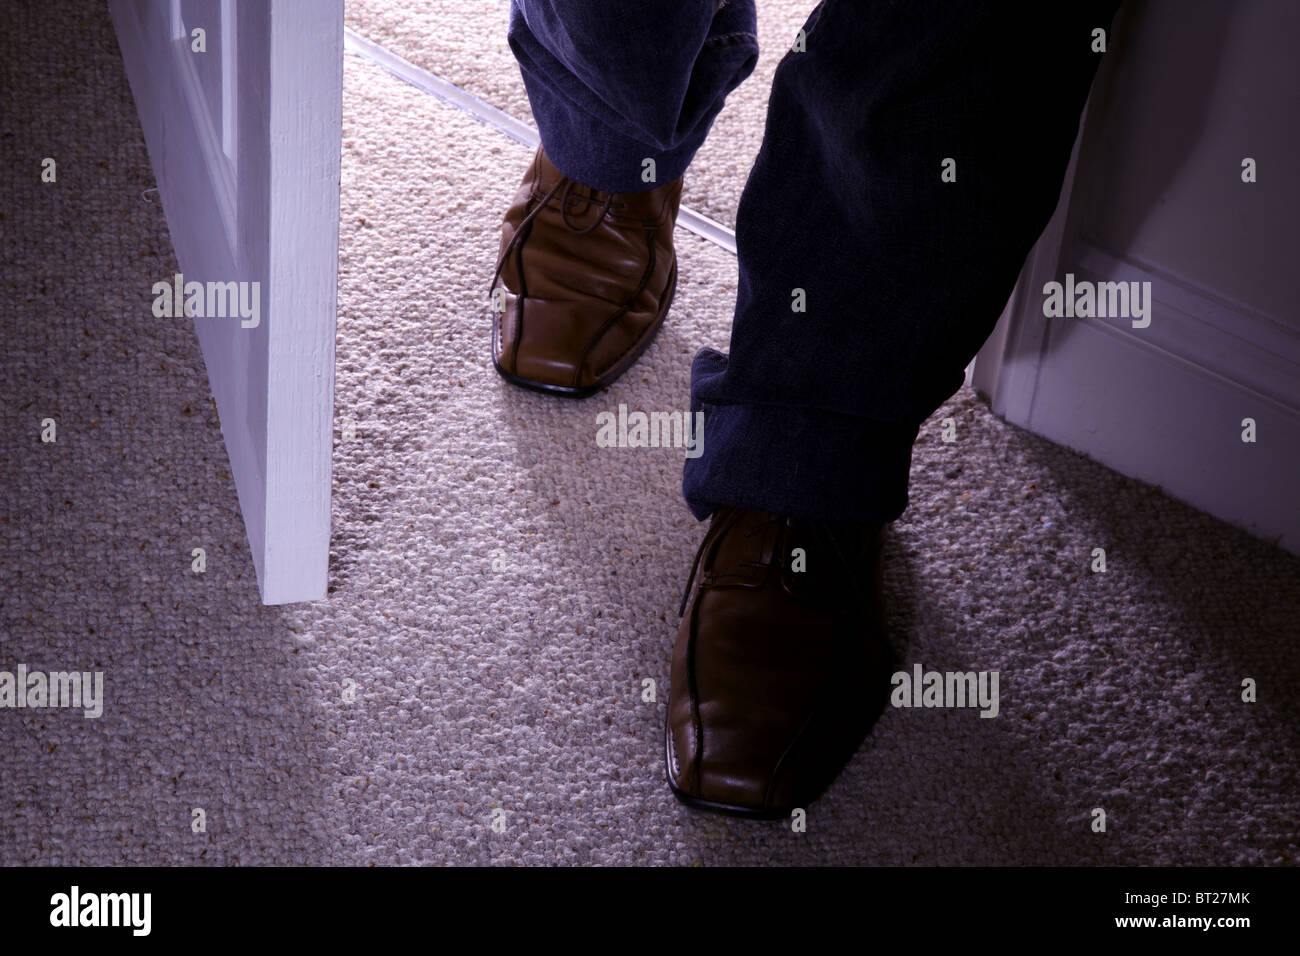 Feet with brown shoes entering a carpeted room Stock Photo